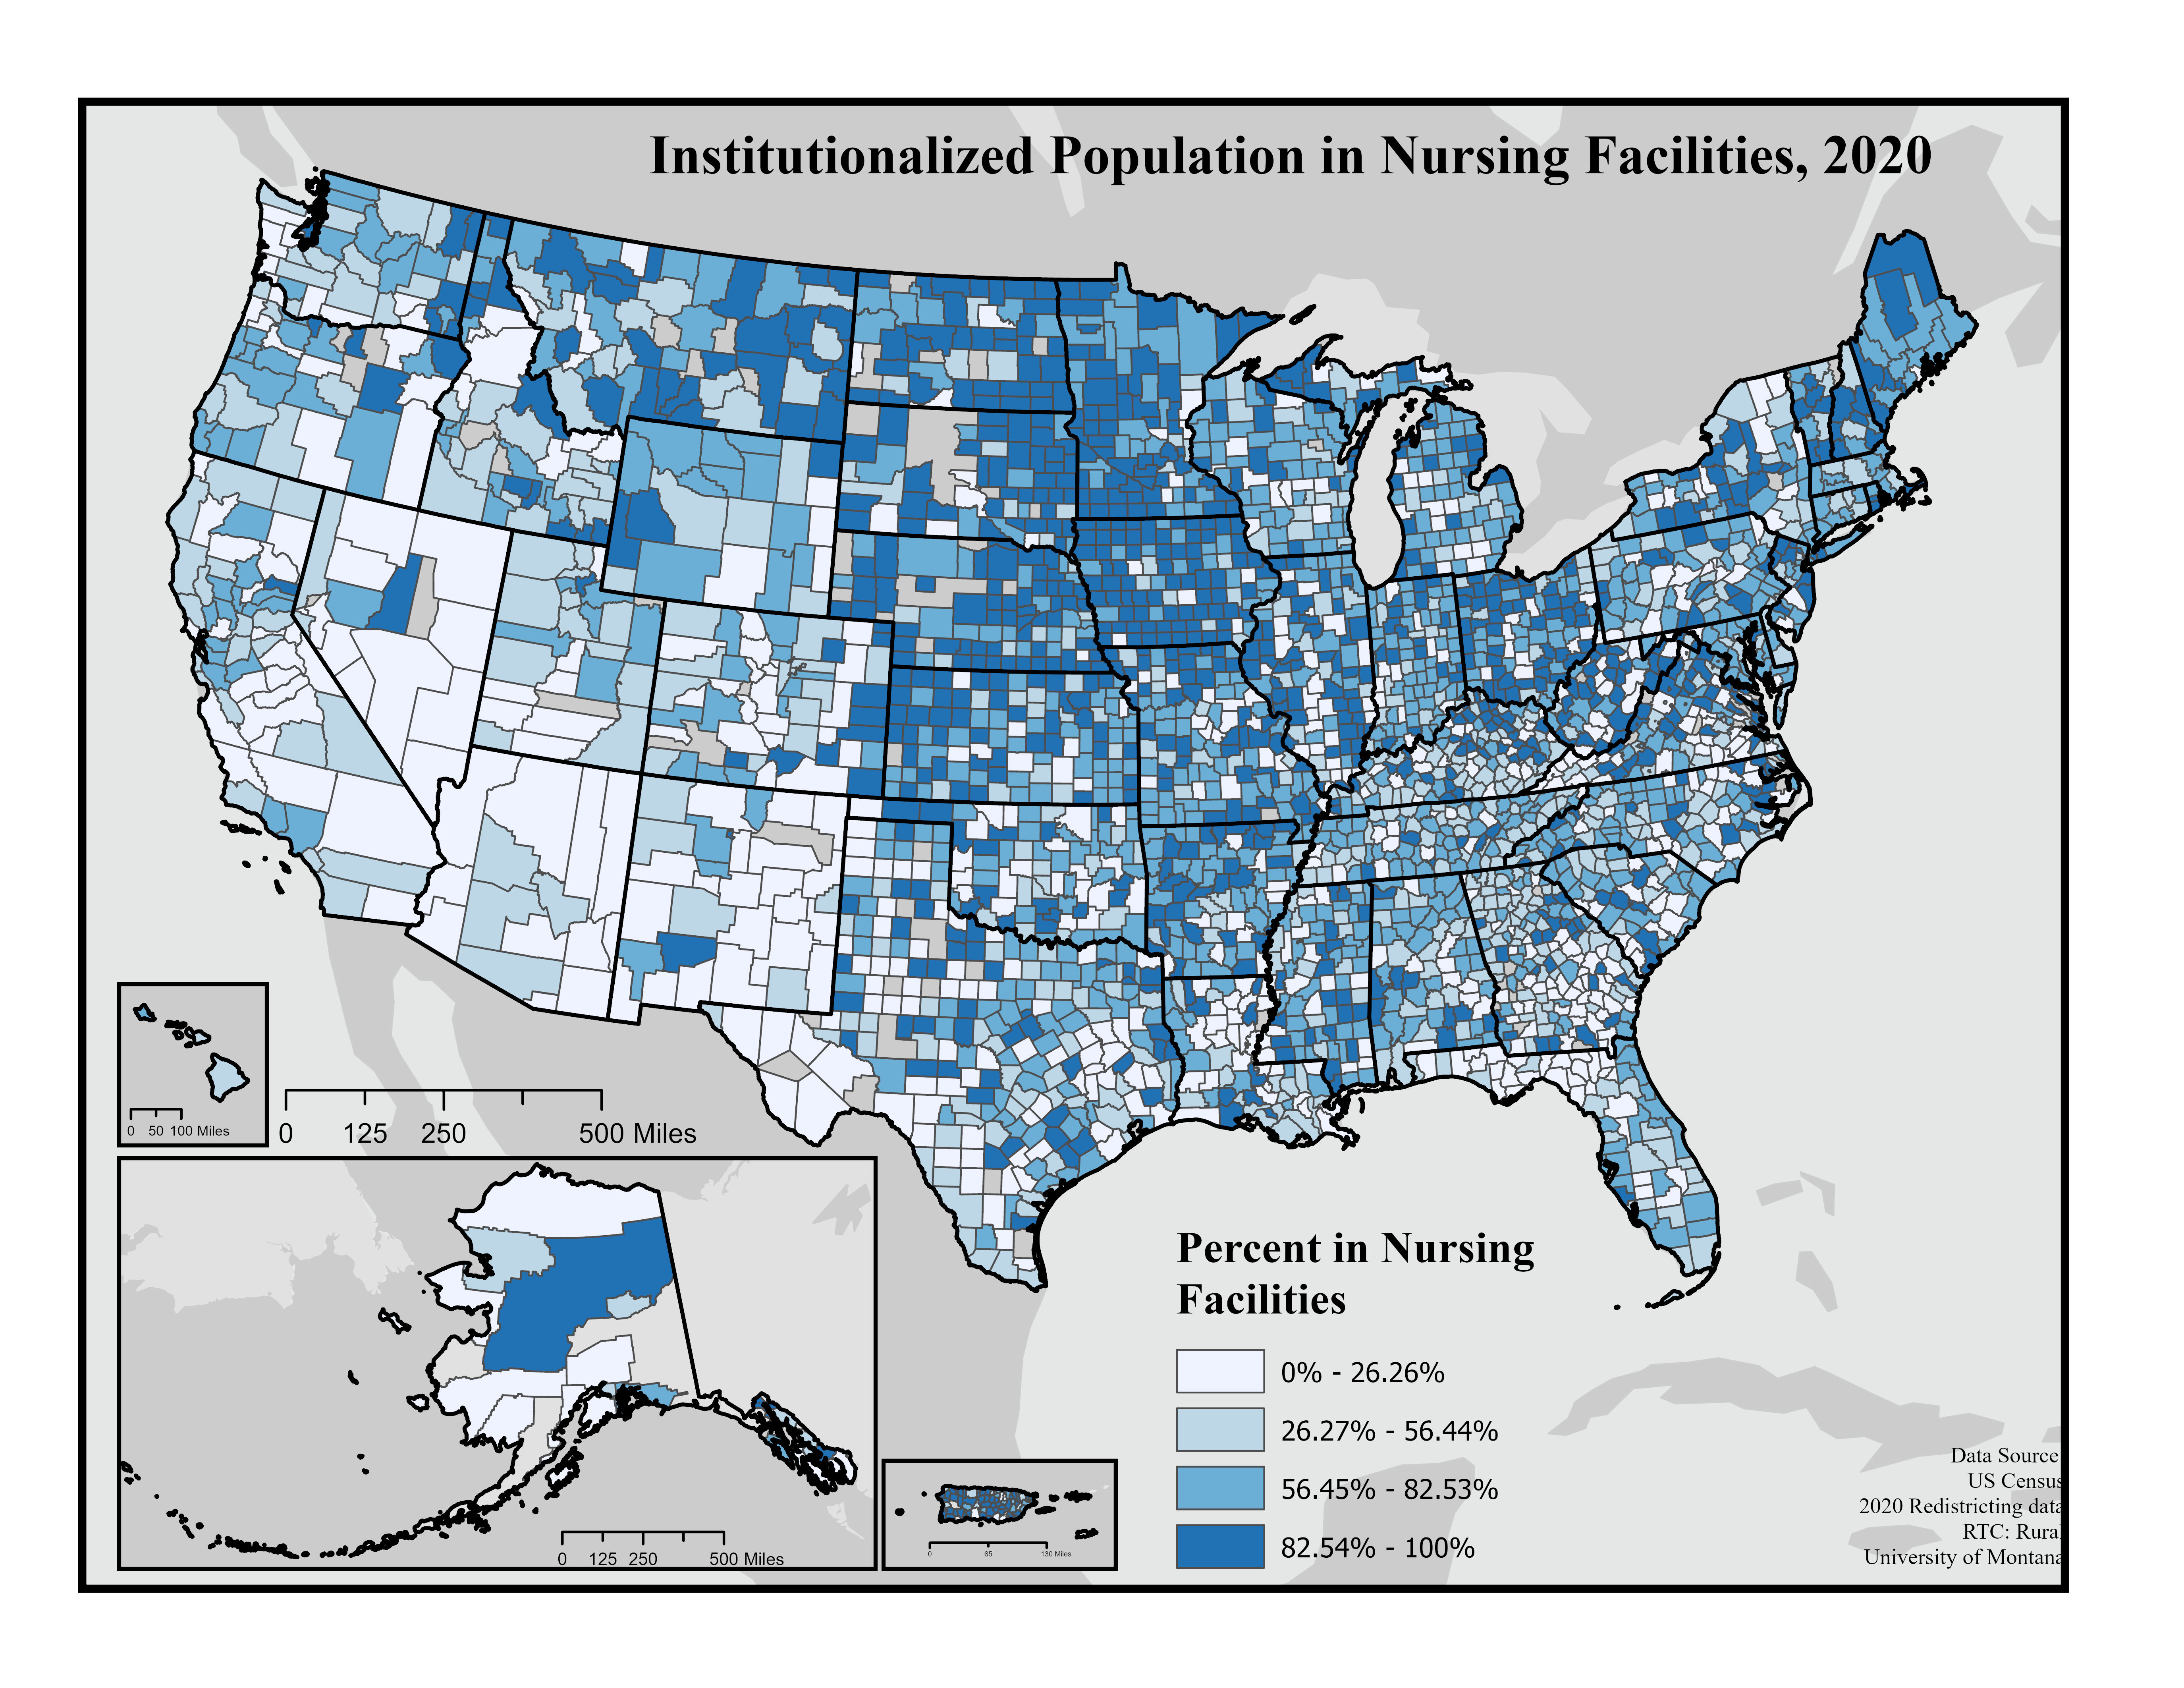 A map of the United States counties showing the percentage of the institutionalized population who reside in nursing facilities in shades of light to dark blue. These data are from the US Census 2020 redistricting data. In the lightest shade of blue are counties with 0% to 26% of the institutionalized population in nursing homes. In light blue are counties with 26.27% to 56.44% and then darker blue representing 56.45% to 82.53%. The darkest blue counties have 82.54% to 100% of the institutionalized populations residing in nursing homes. Counties with the highest proportion of institutionalized populations in nursing homes are scattered across the country with some clustering in the Great Plains, and rural counties in the Midwest, West, Northeast and South.